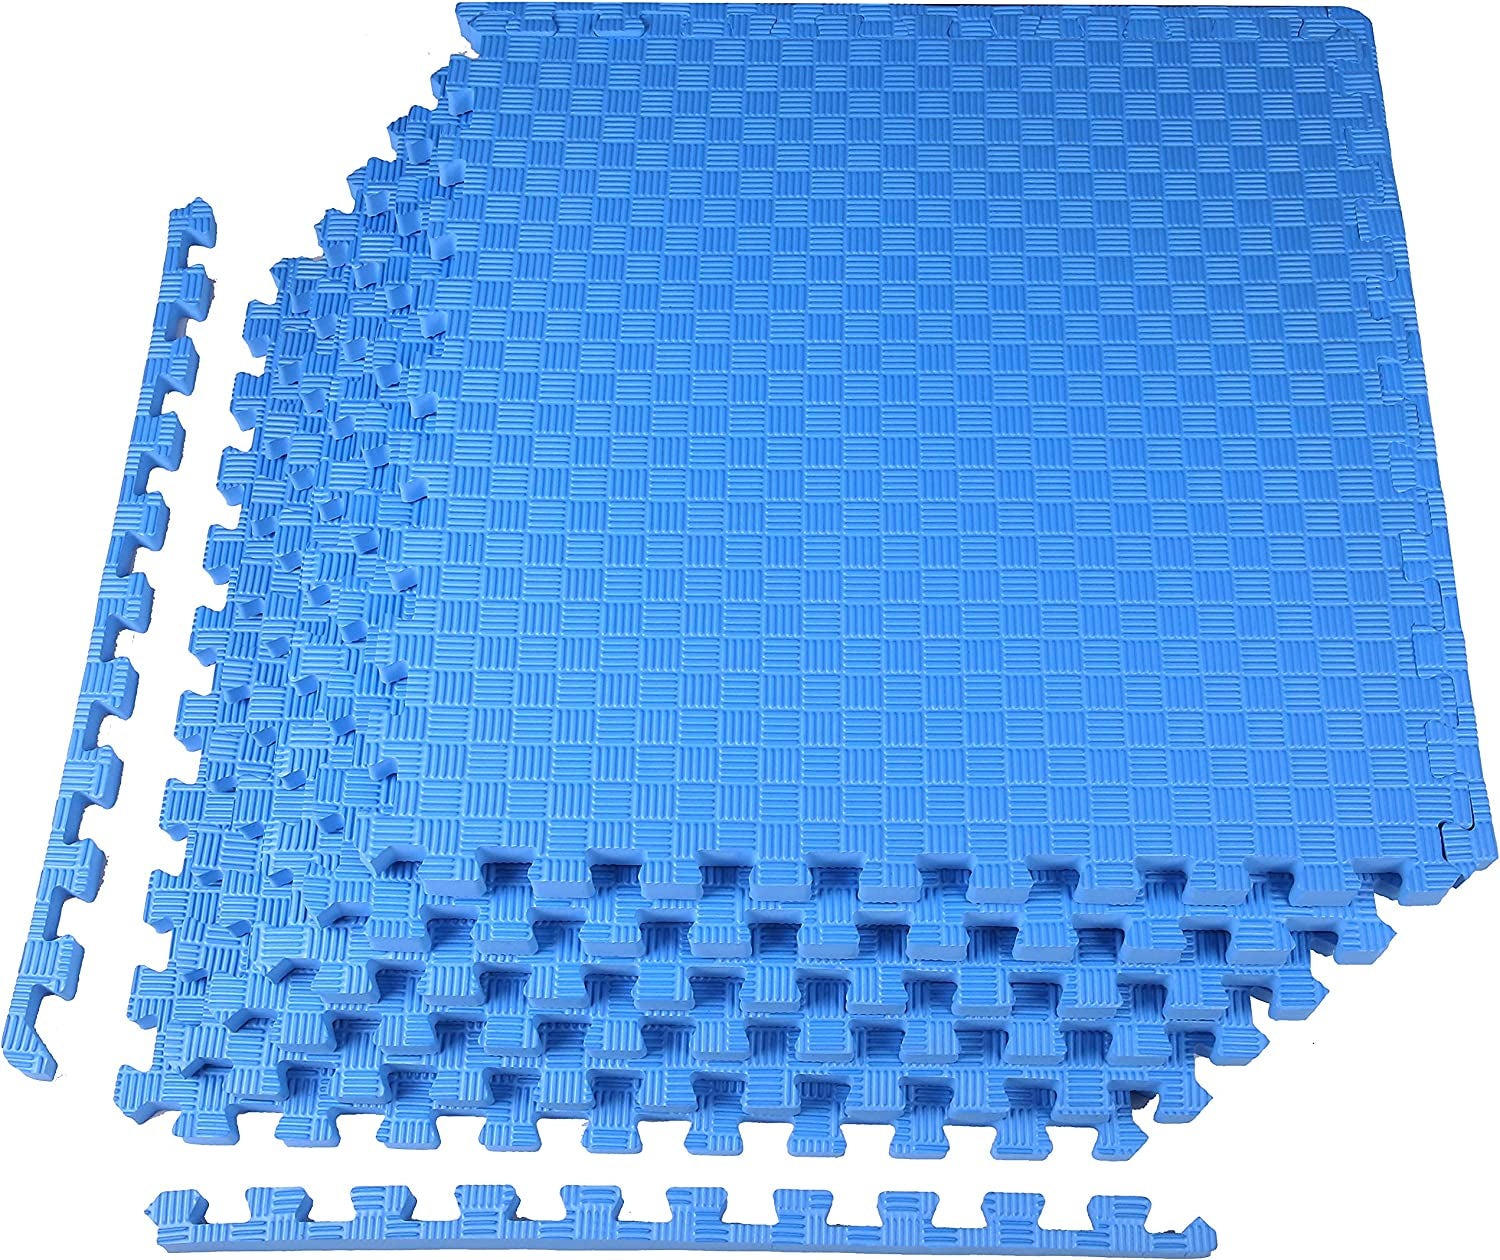 Balancefrom 24 Square Foot Puzzle Exercise Mat with EVA Foam Interlocking Tiles for Exercise, Gymnastics, and Home Gym Protective Flooring, Multicolor